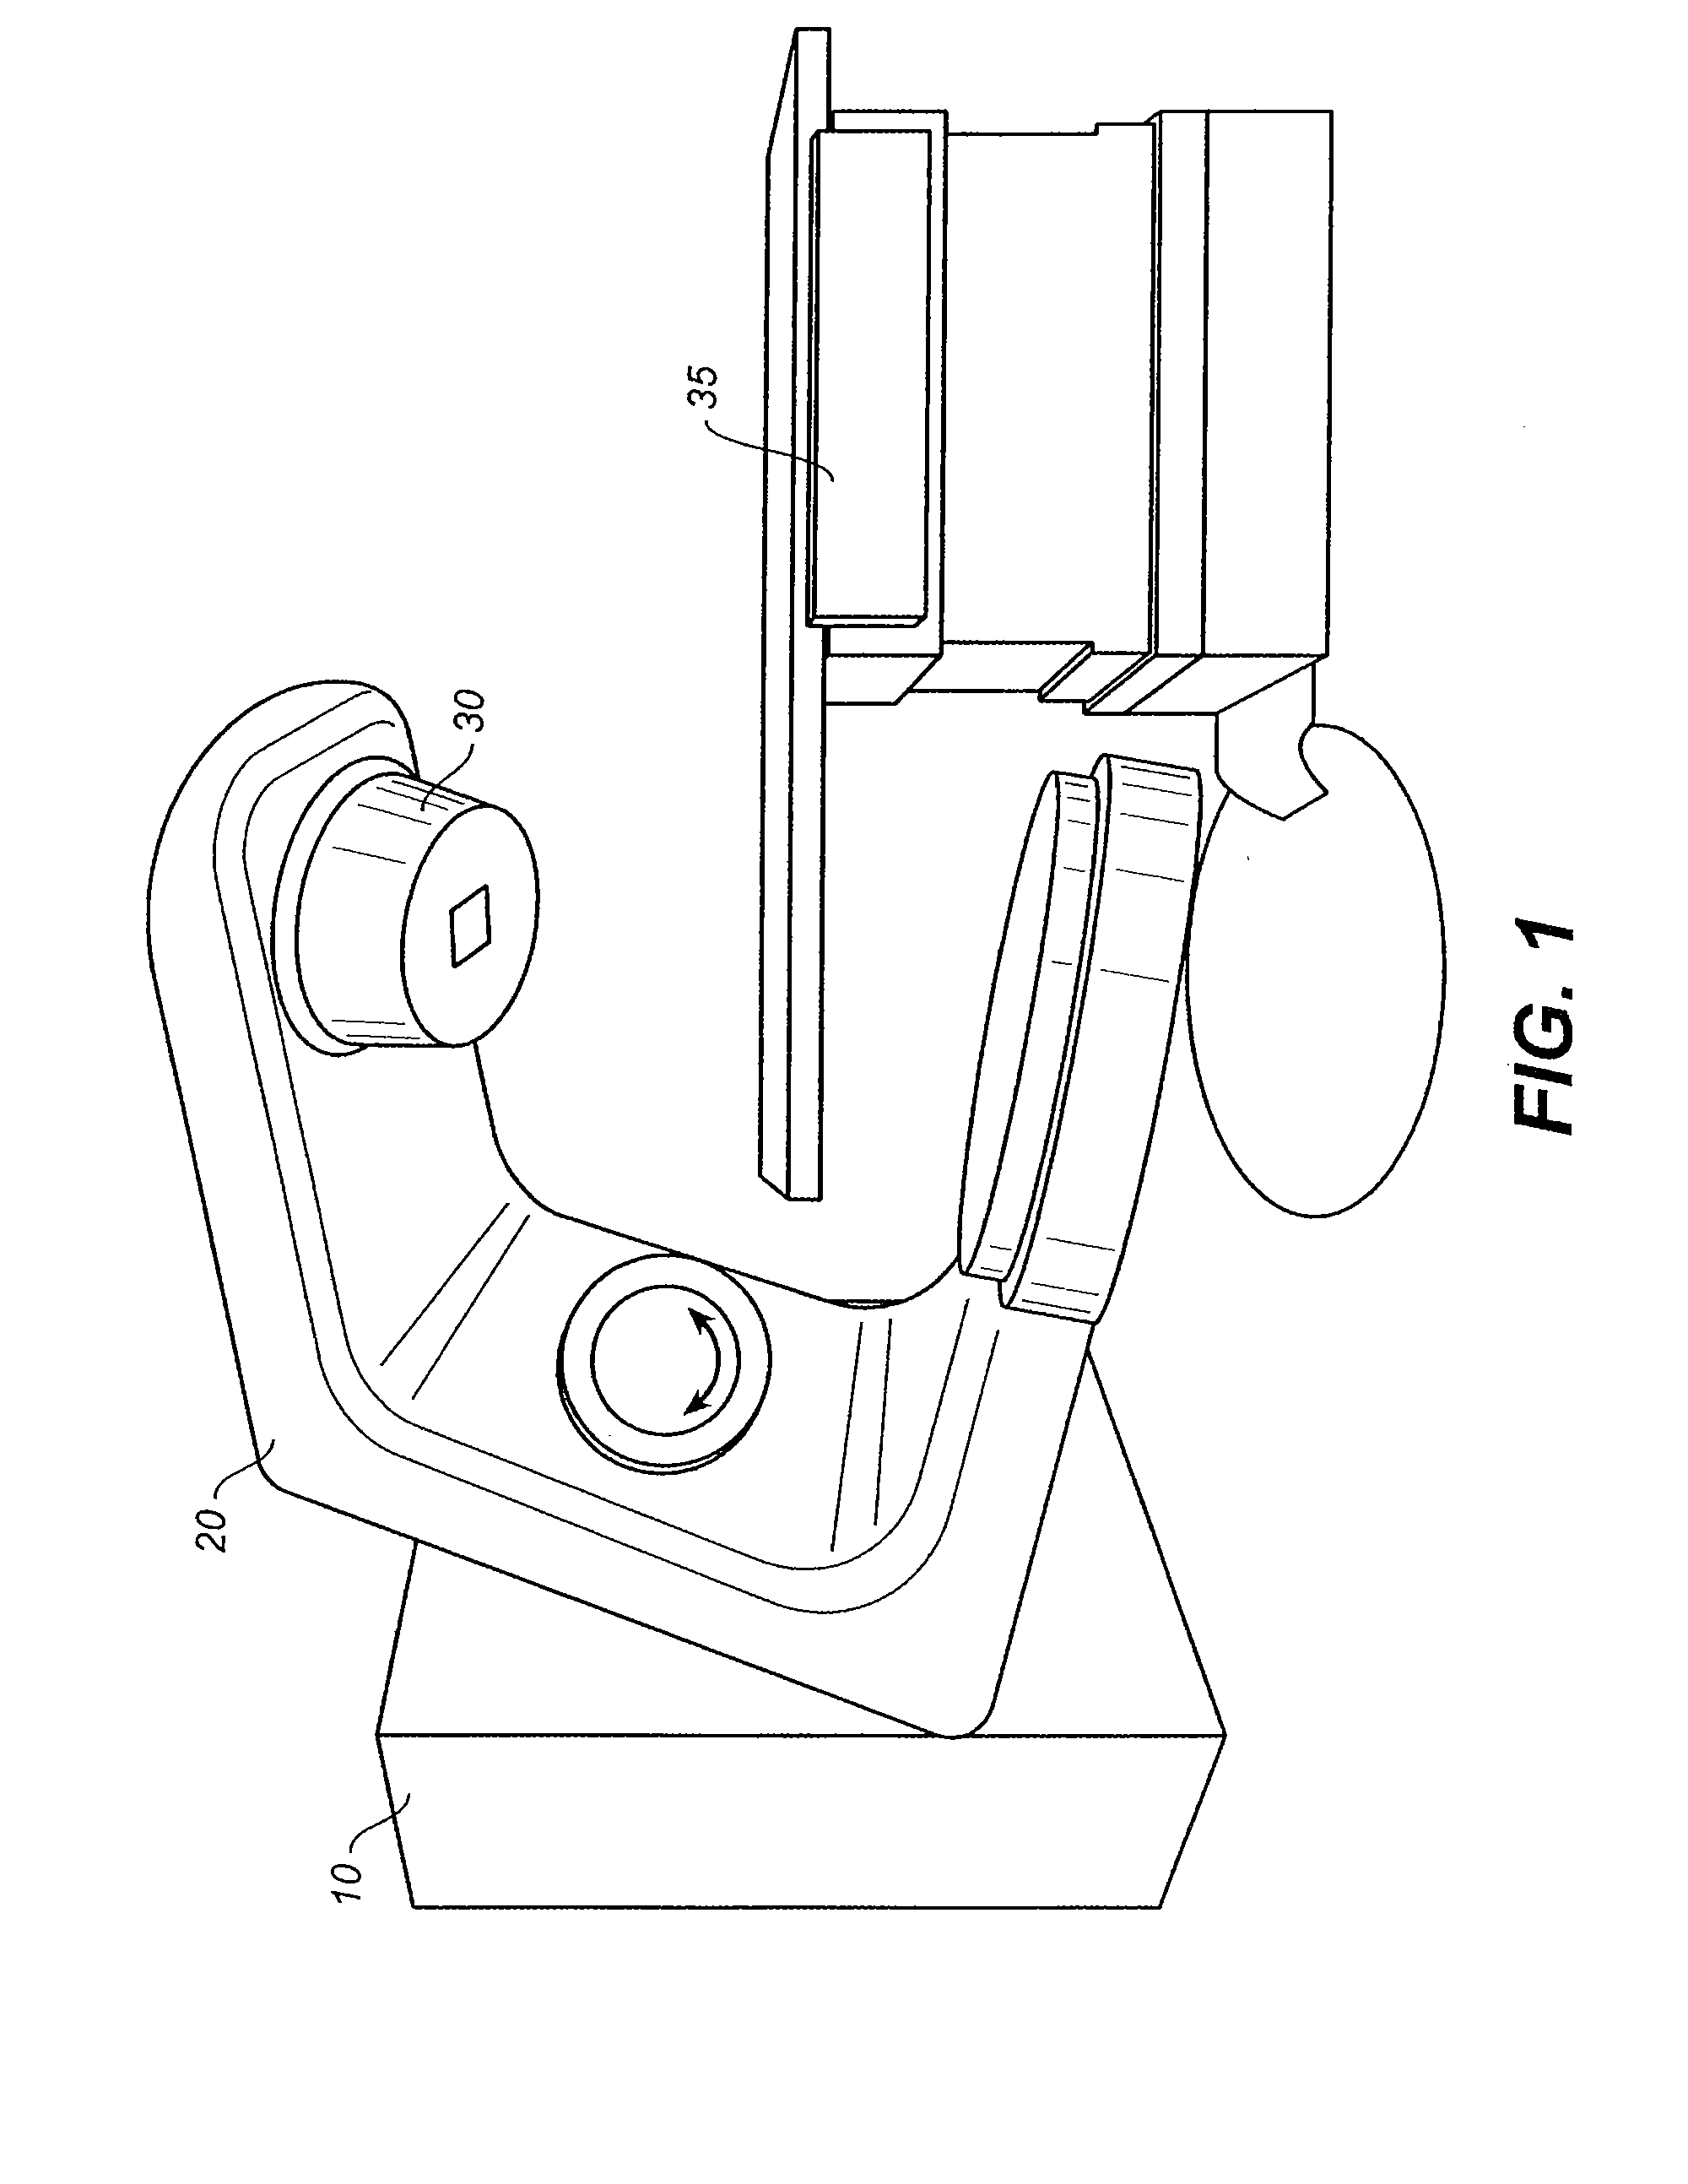 Radiation therapy system and method of using the same